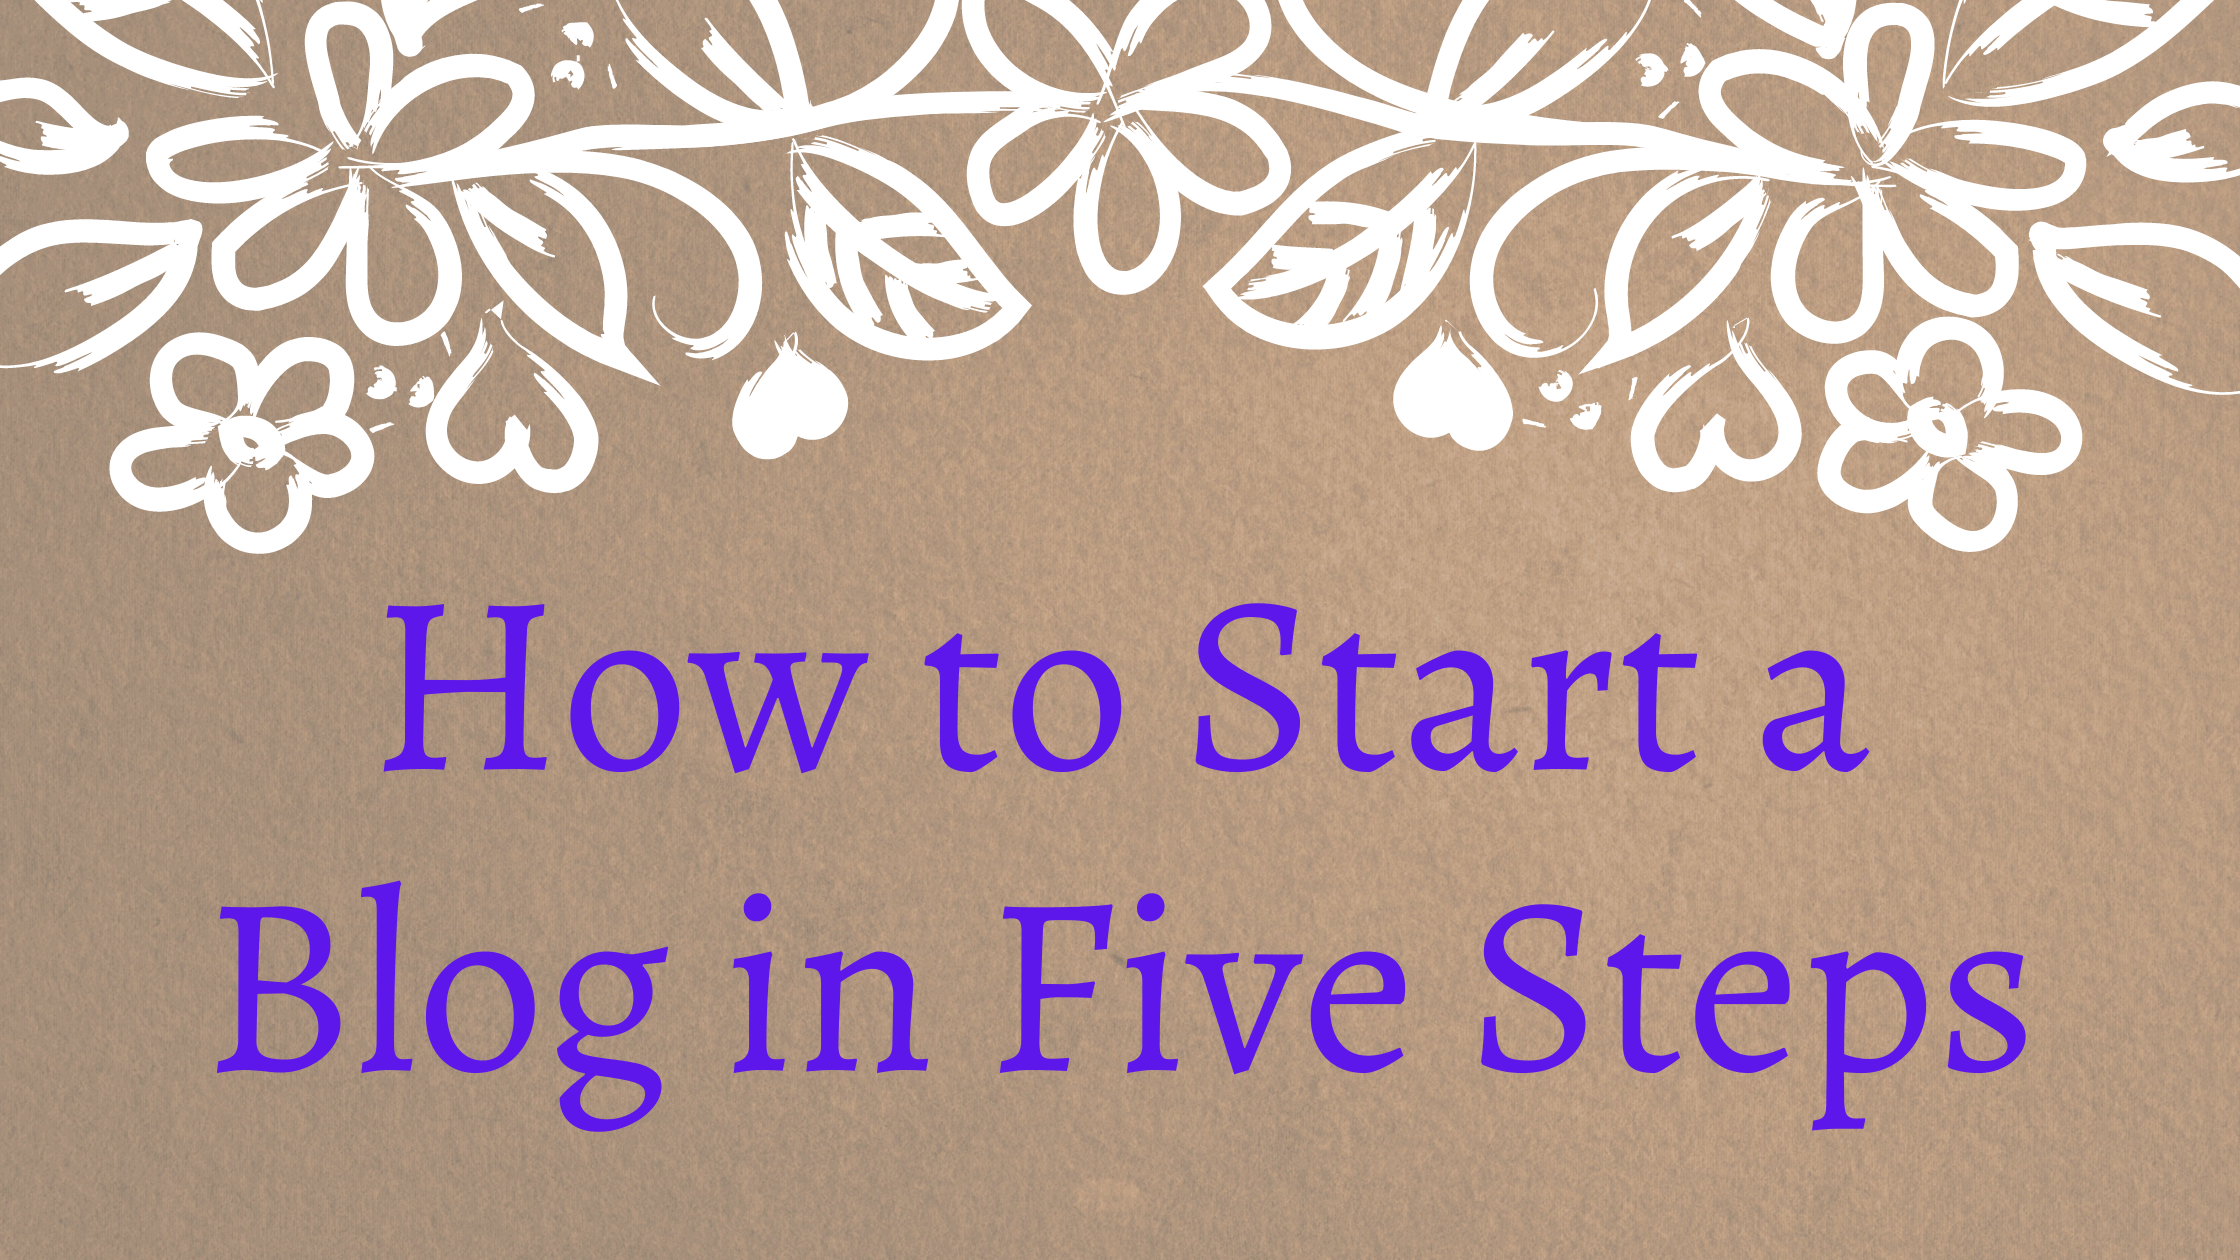 How to start a Blog in Five Steps (2018)